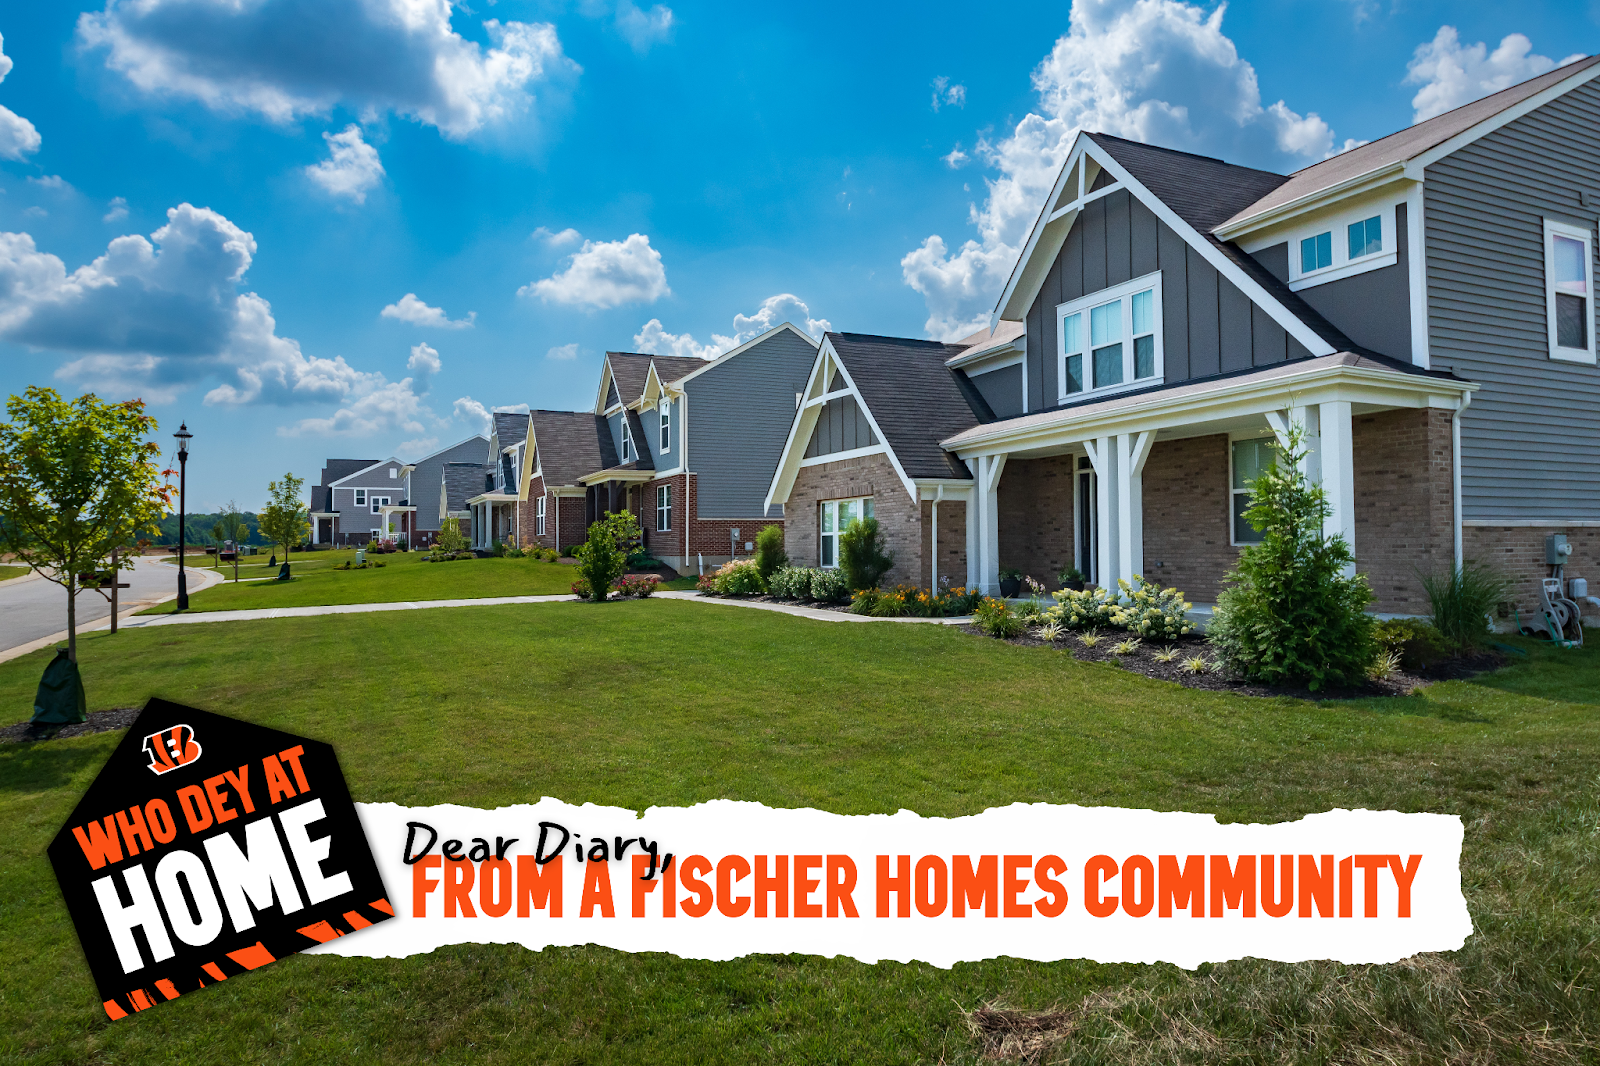 Dear Diary from a Fischer Homes Community | Who Dey at Home